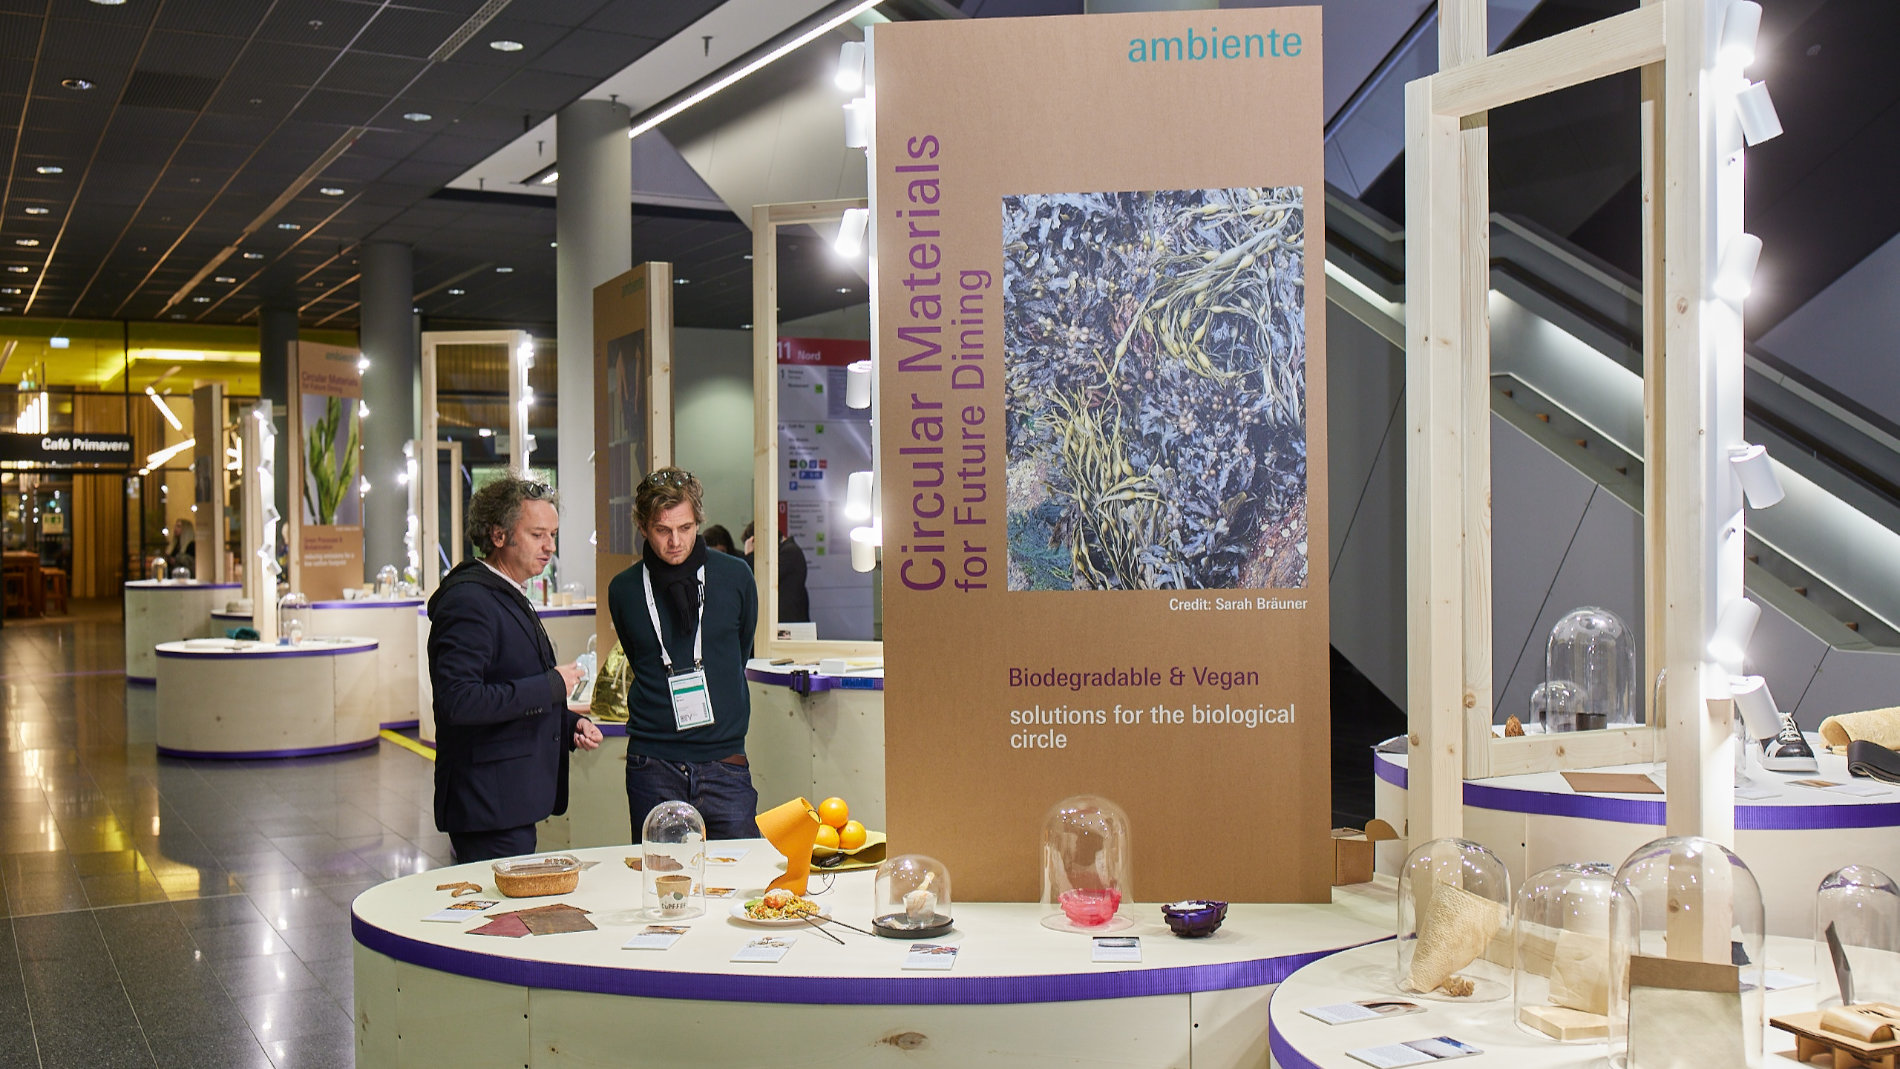 Circular Materials for Future Dining area at Ambiente